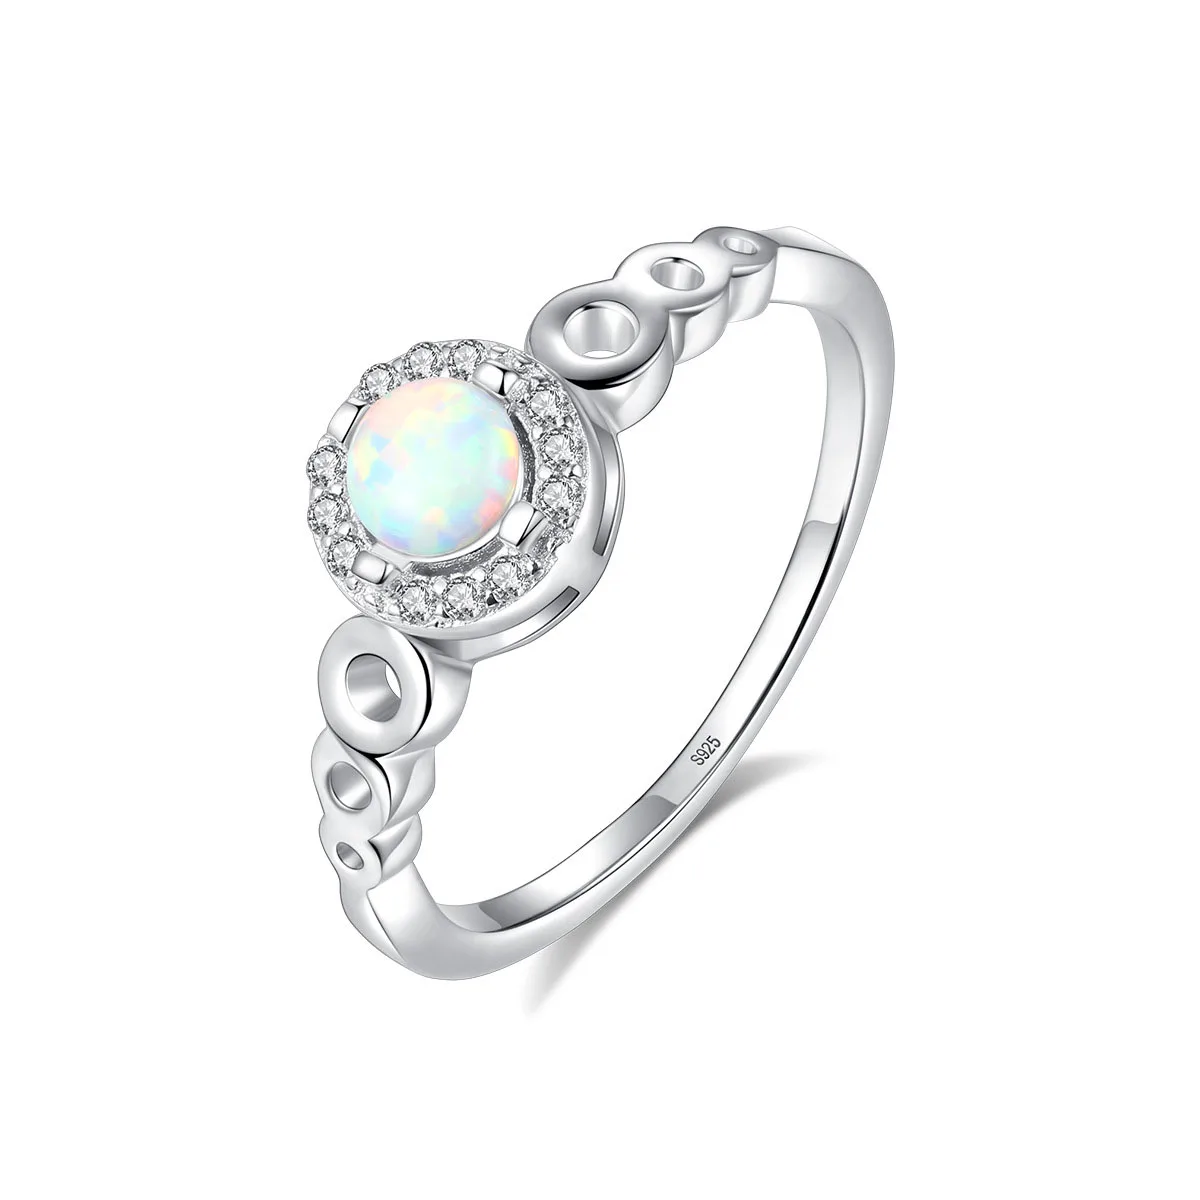 

Vintage Halo Design 925 Sterling Silver White Opal Promise Ring Fine S925 Cubic Zirconia CZ October Birthstone Diamond Ring